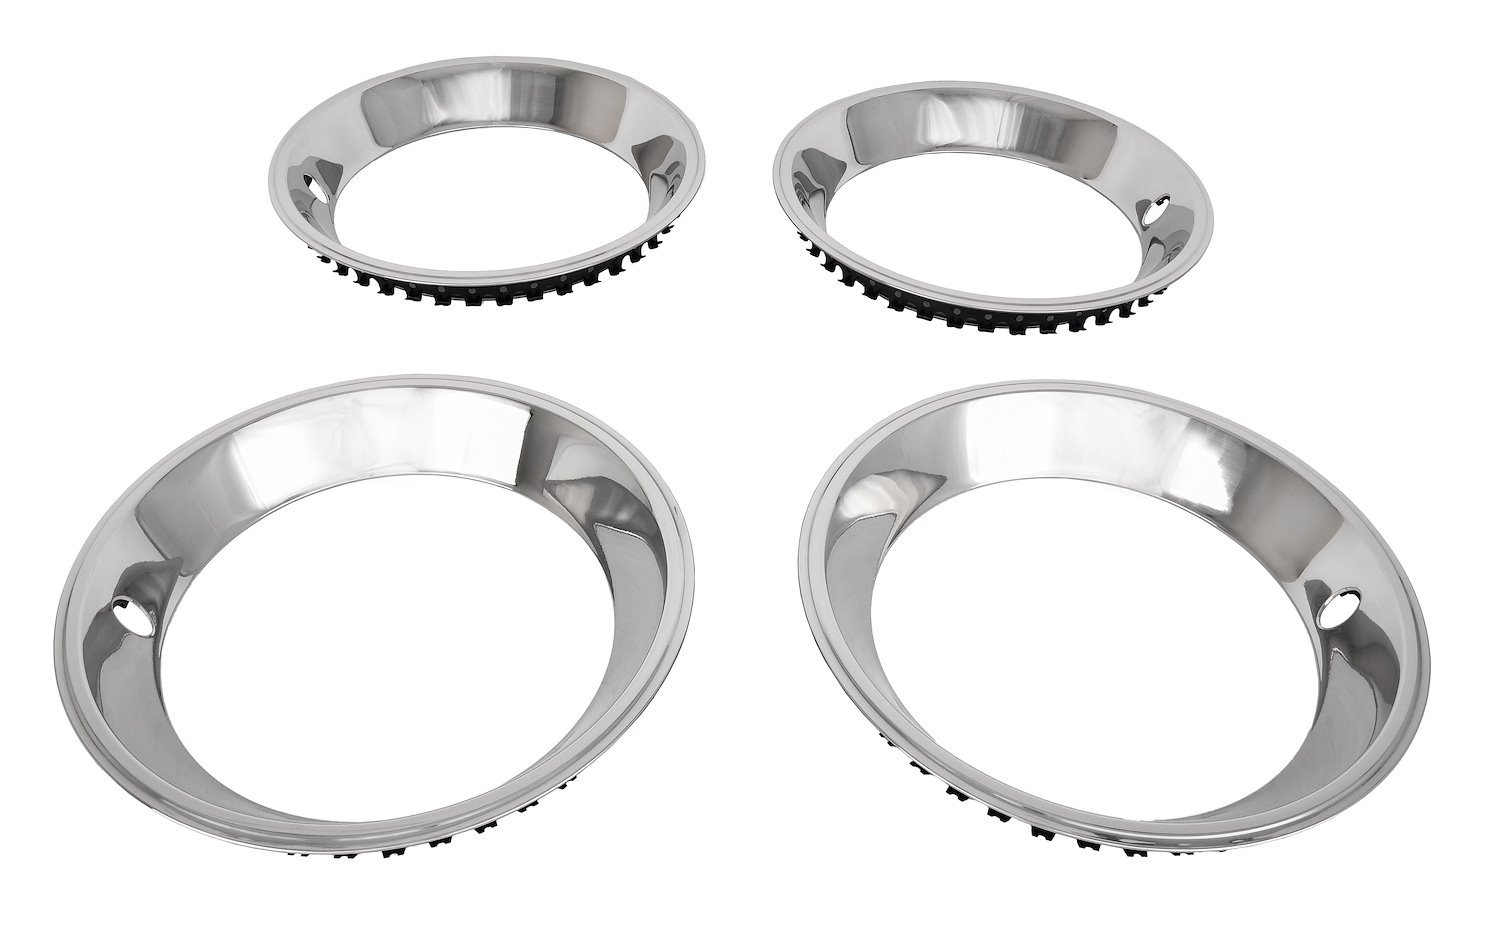 Stainless Steel Deep Dish Trim Ring Set for 15 in. x 7 in. Wheels [2.375 in. D x 2.750 in. W]